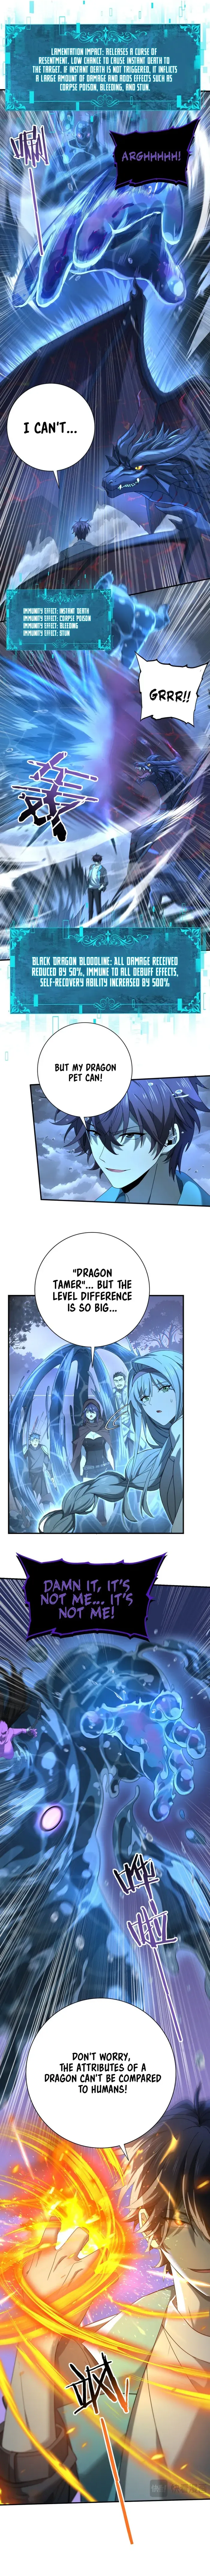 WORTHLESS PROFESSION: DRAGON TAMER Chapter 9 page 5